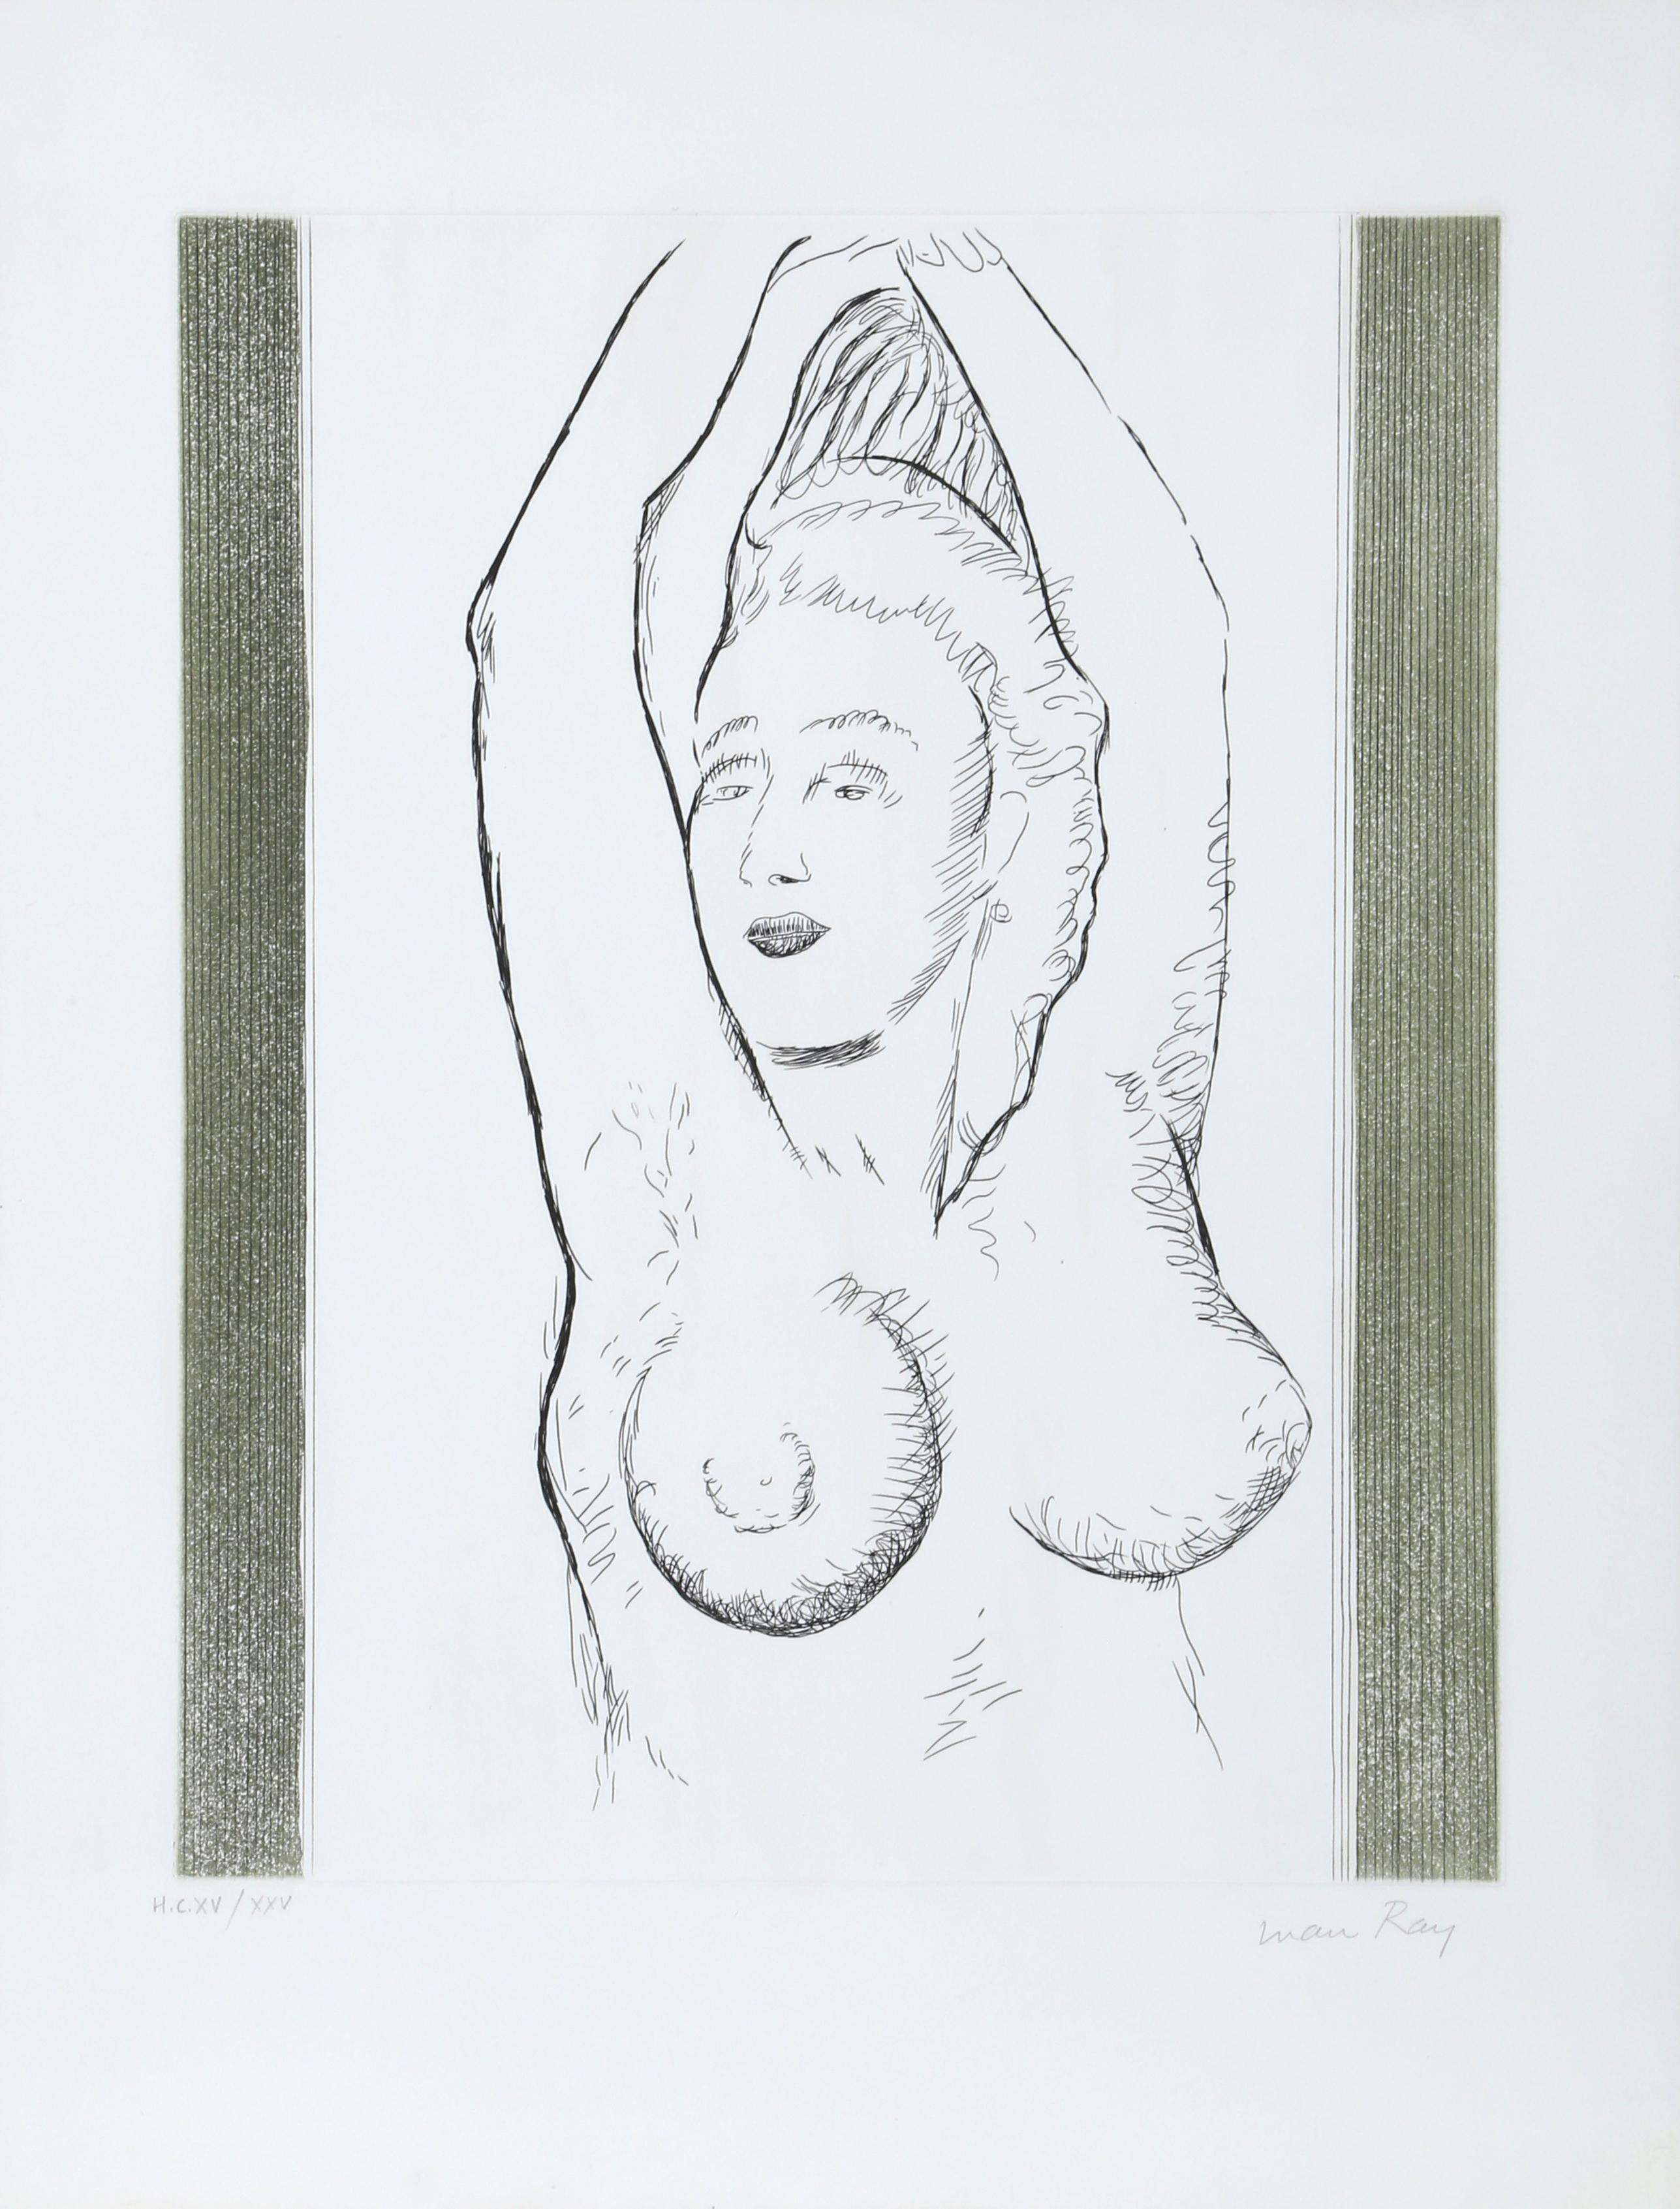 Sonia from La Ballade des Dames Hors du Temps, Etching by Man Ray